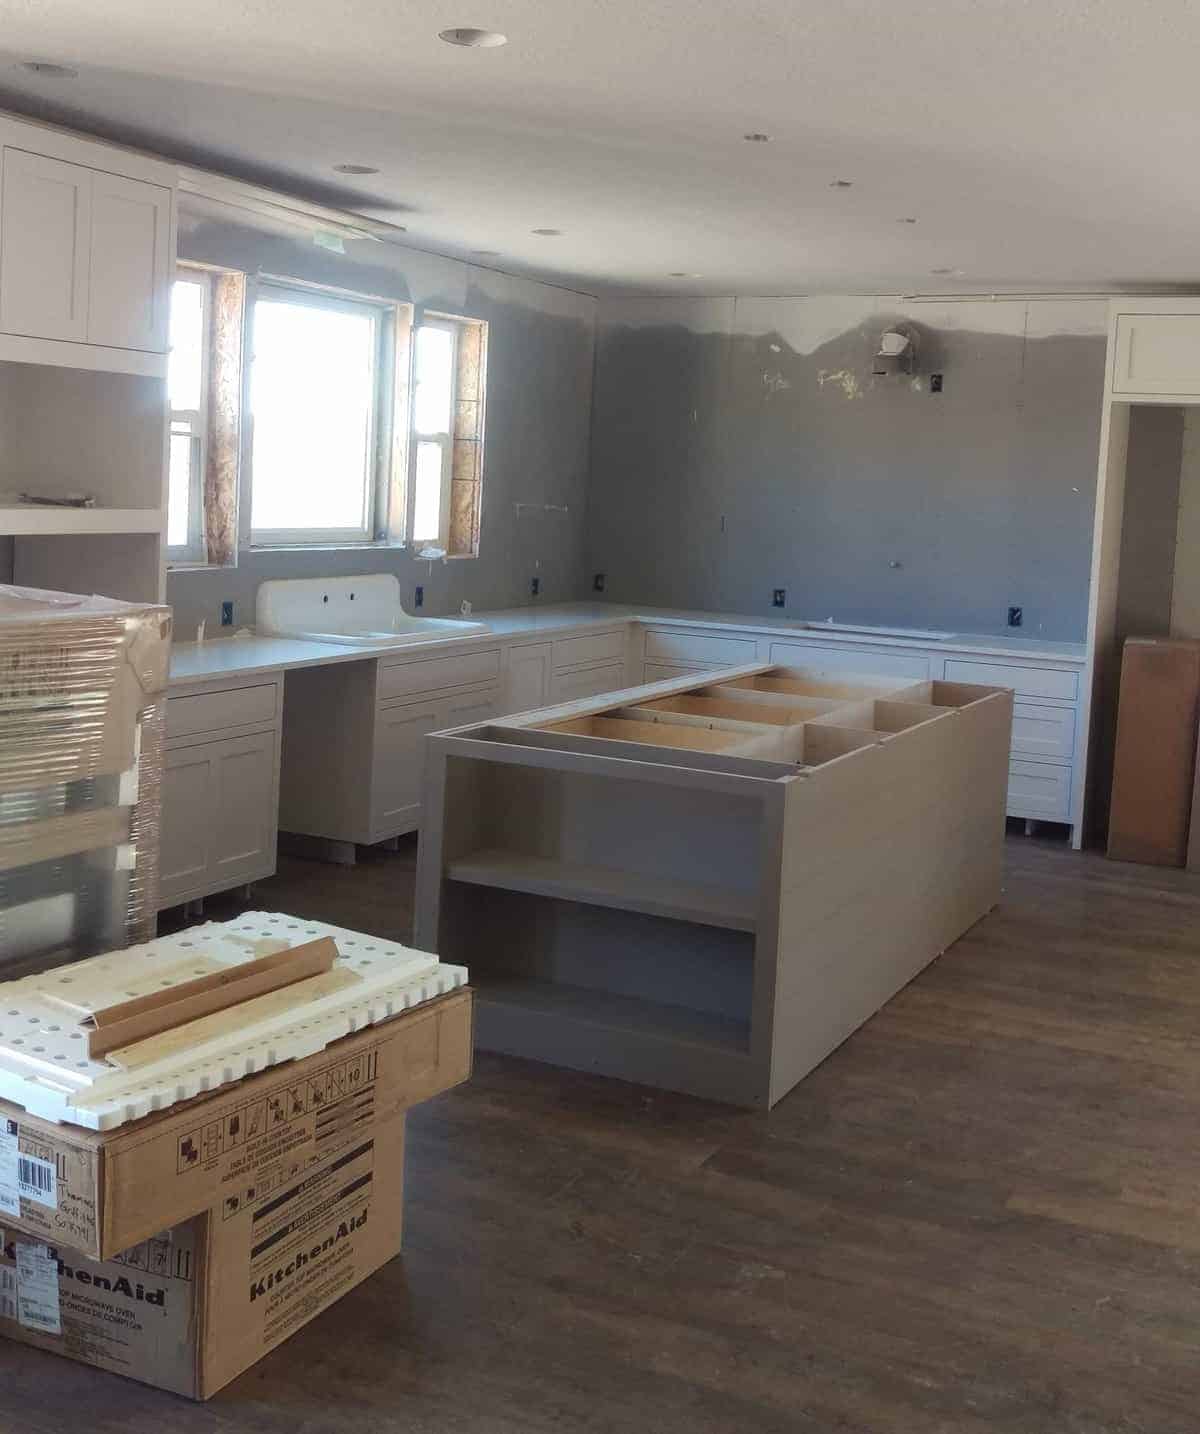 white cabinets and gray walls in the new kitchen